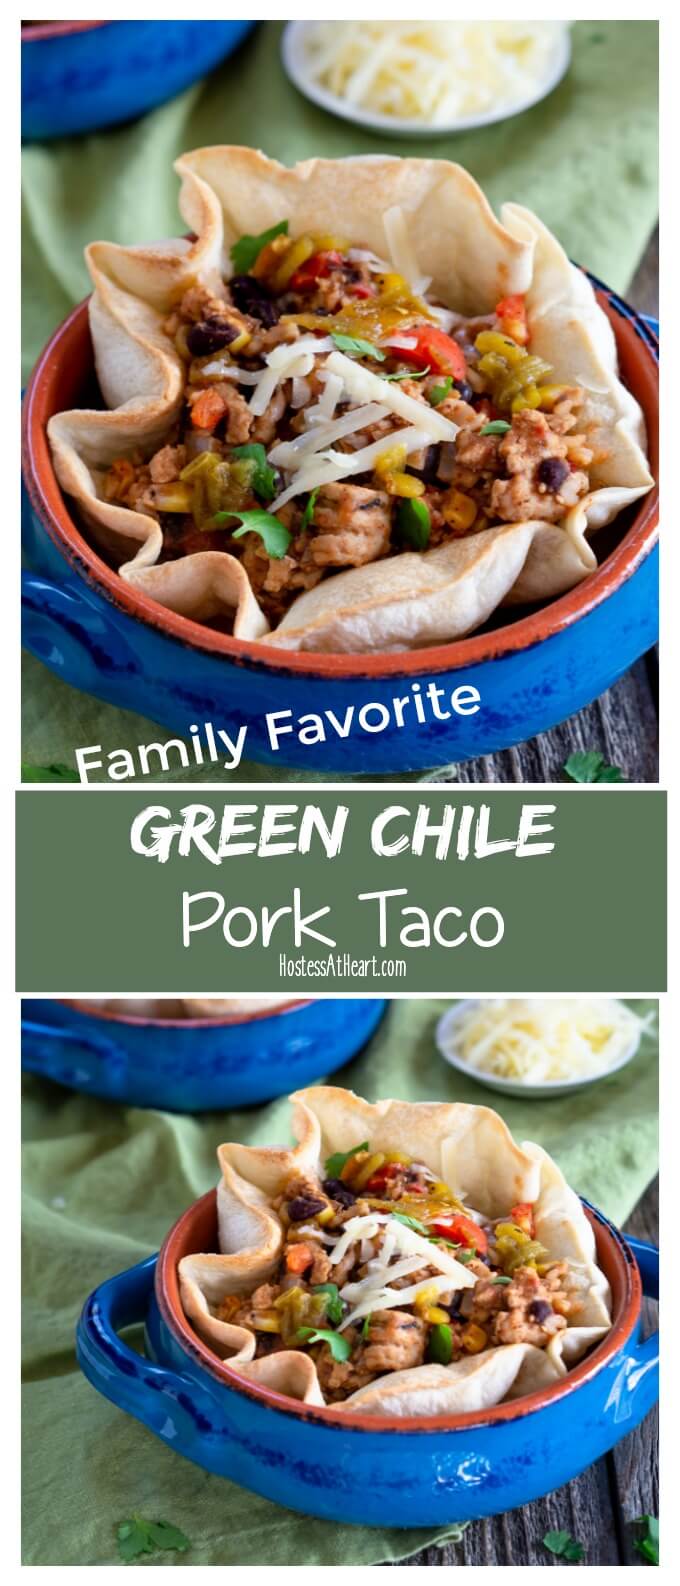 Green Chili Pork Recipe - A Busy Day Favorite - Hostess At Heart